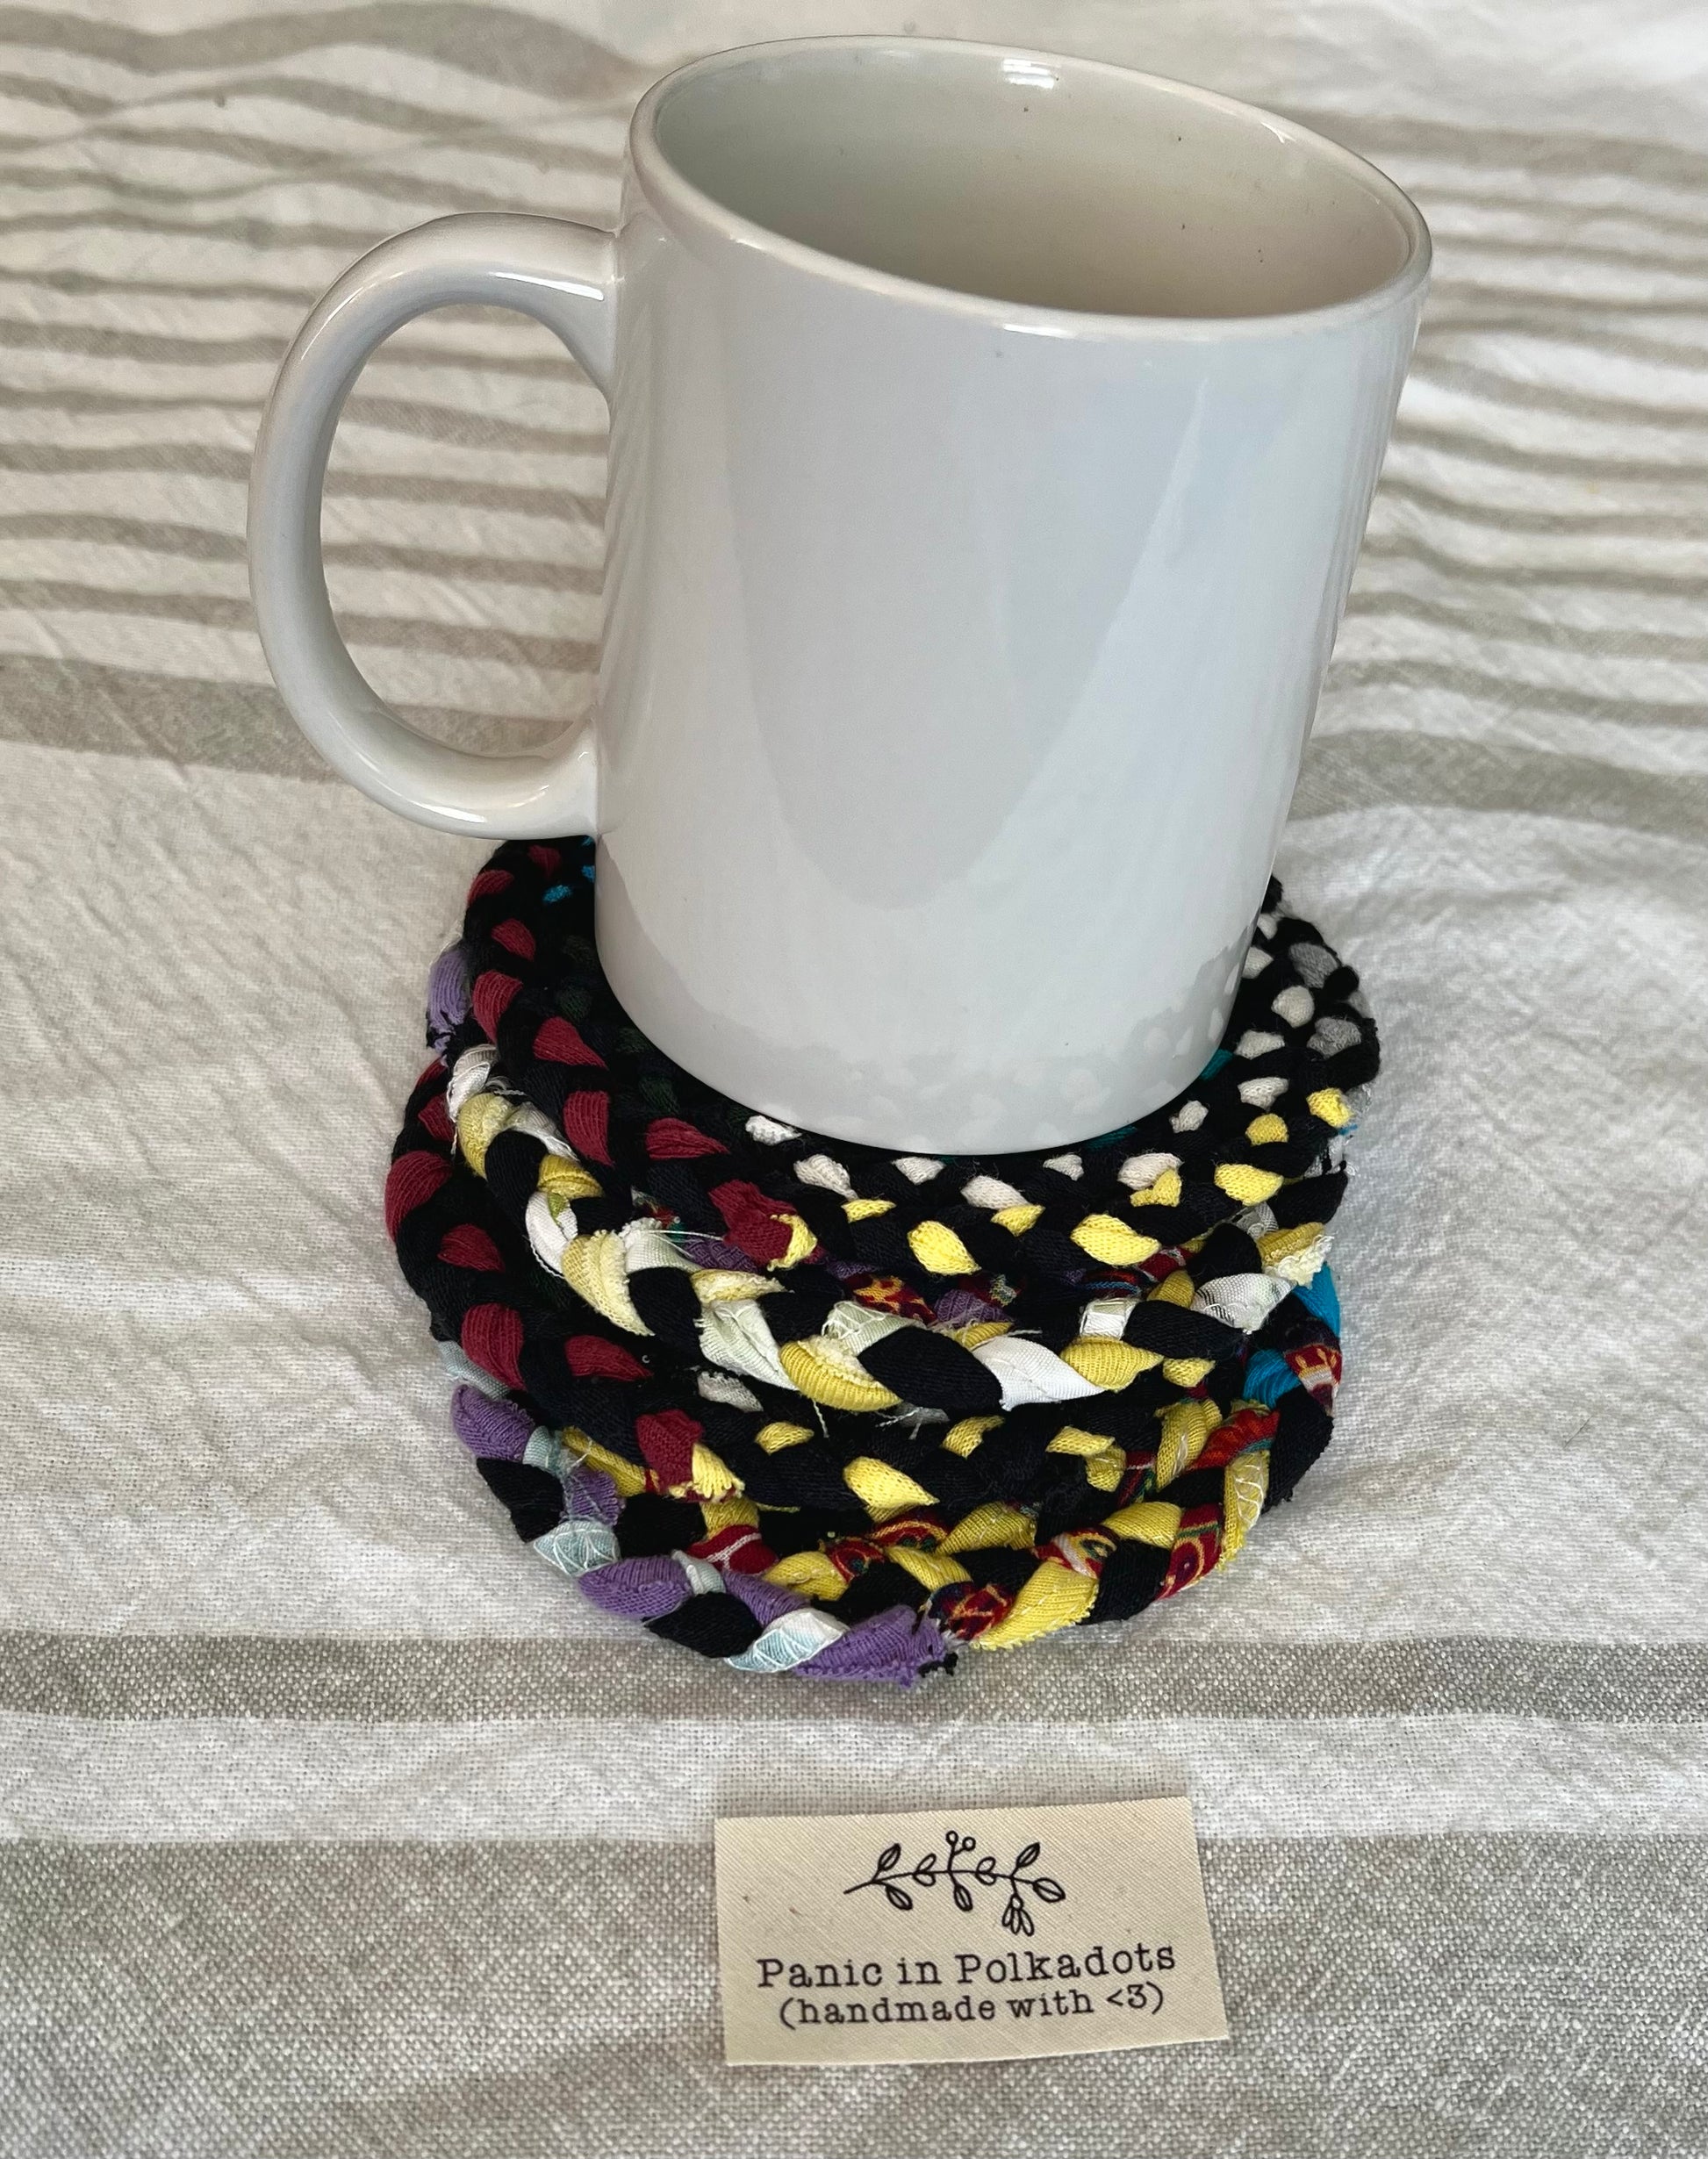 Mini rug coaster set, in a stack, with a white coffee mug on top, for scale and usage idea.